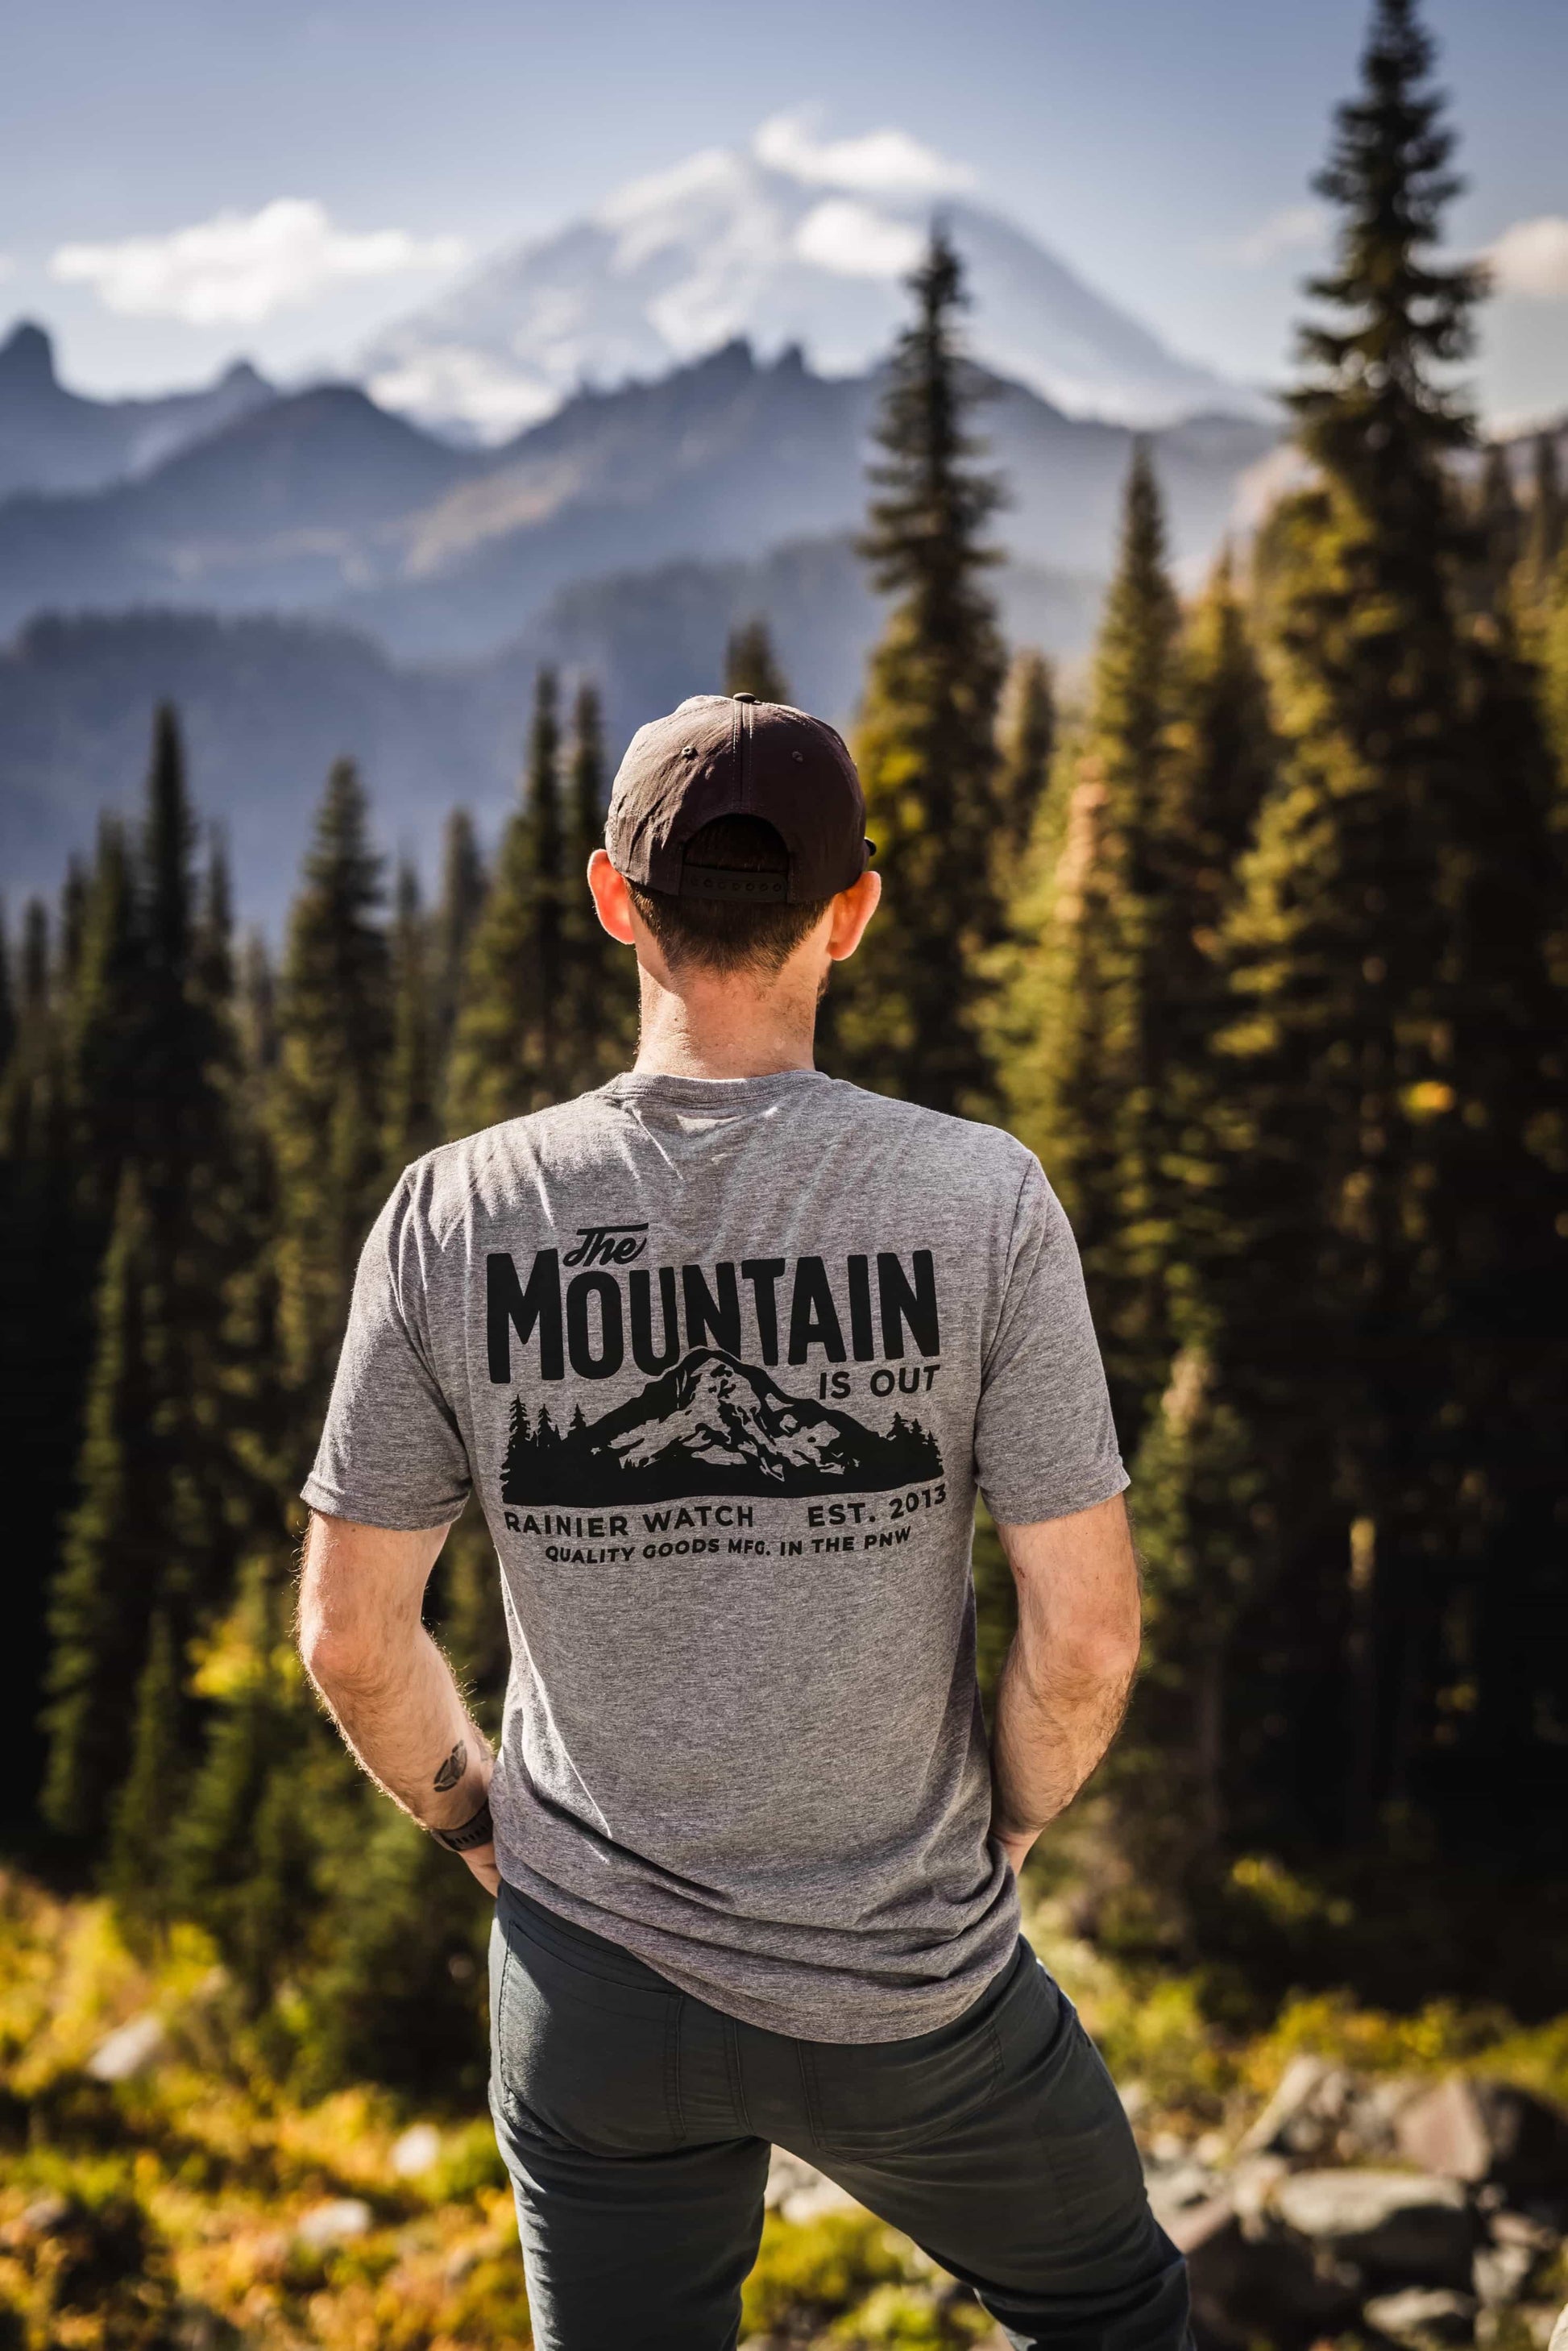 The Mountain Is Out Eco Tee – Rainier Watch